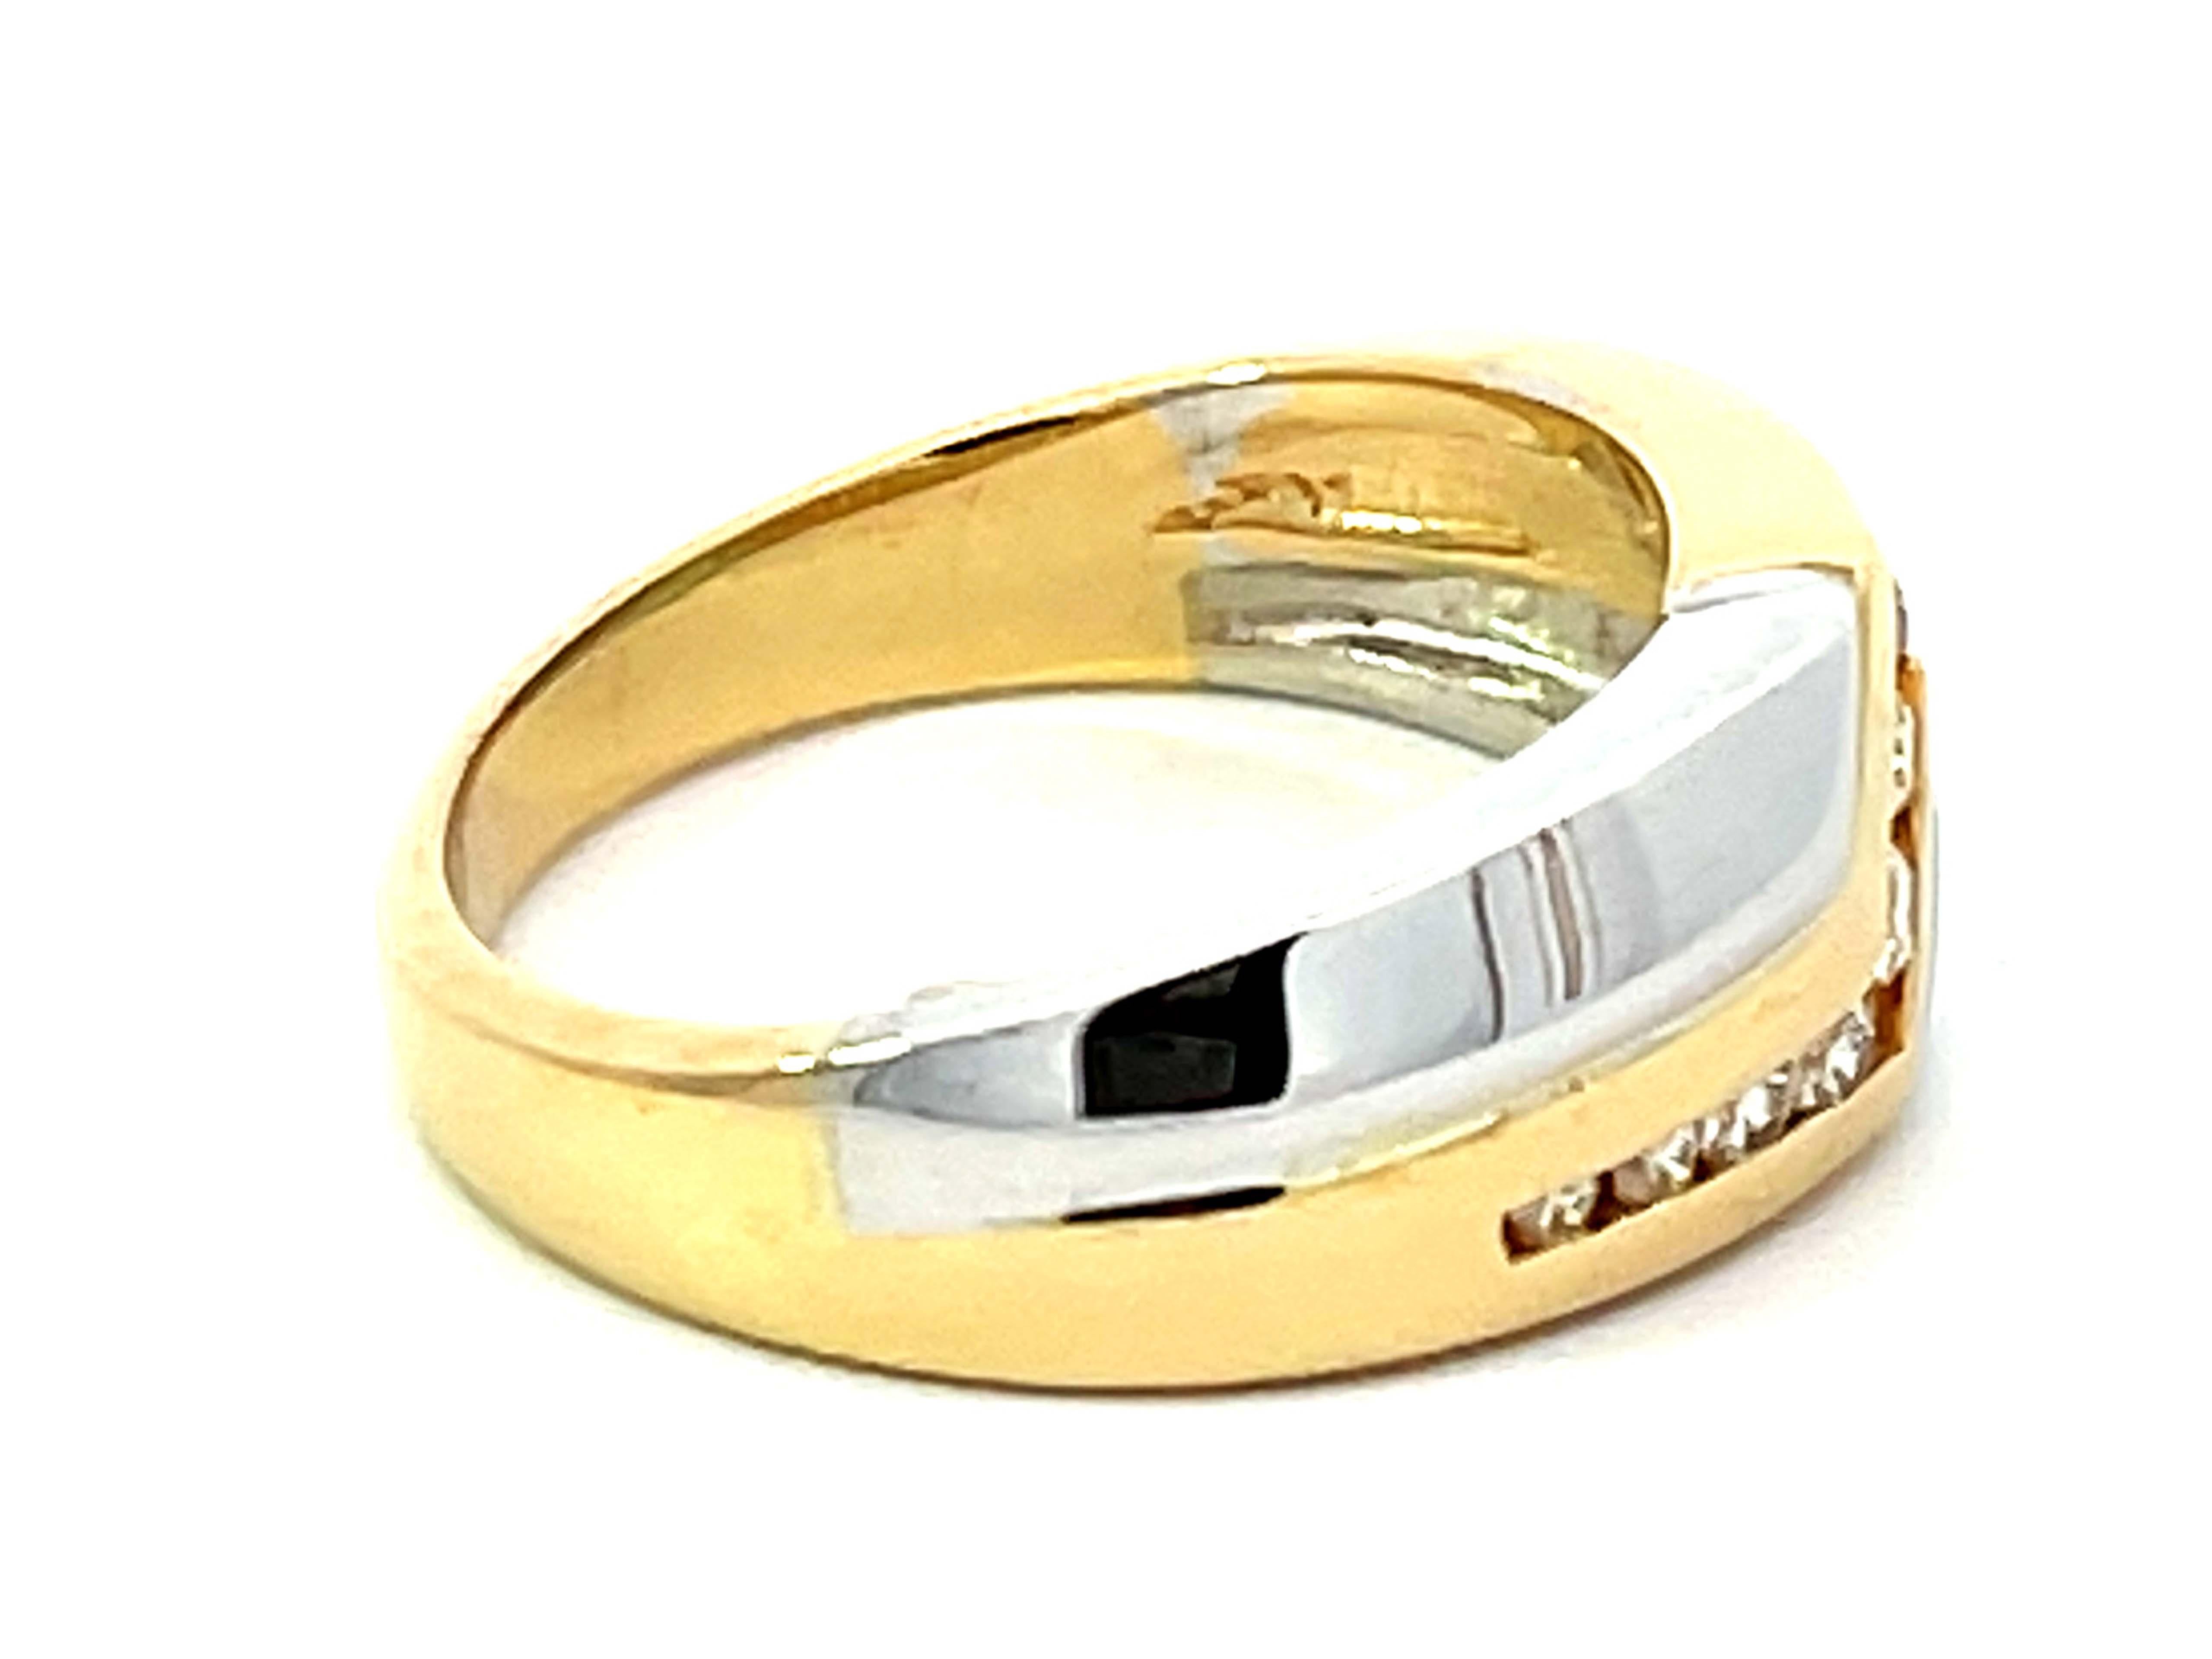 Two Toned Gold Mens Ring with Diamonds 14K Yellow Gold In Excellent Condition For Sale In Honolulu, HI